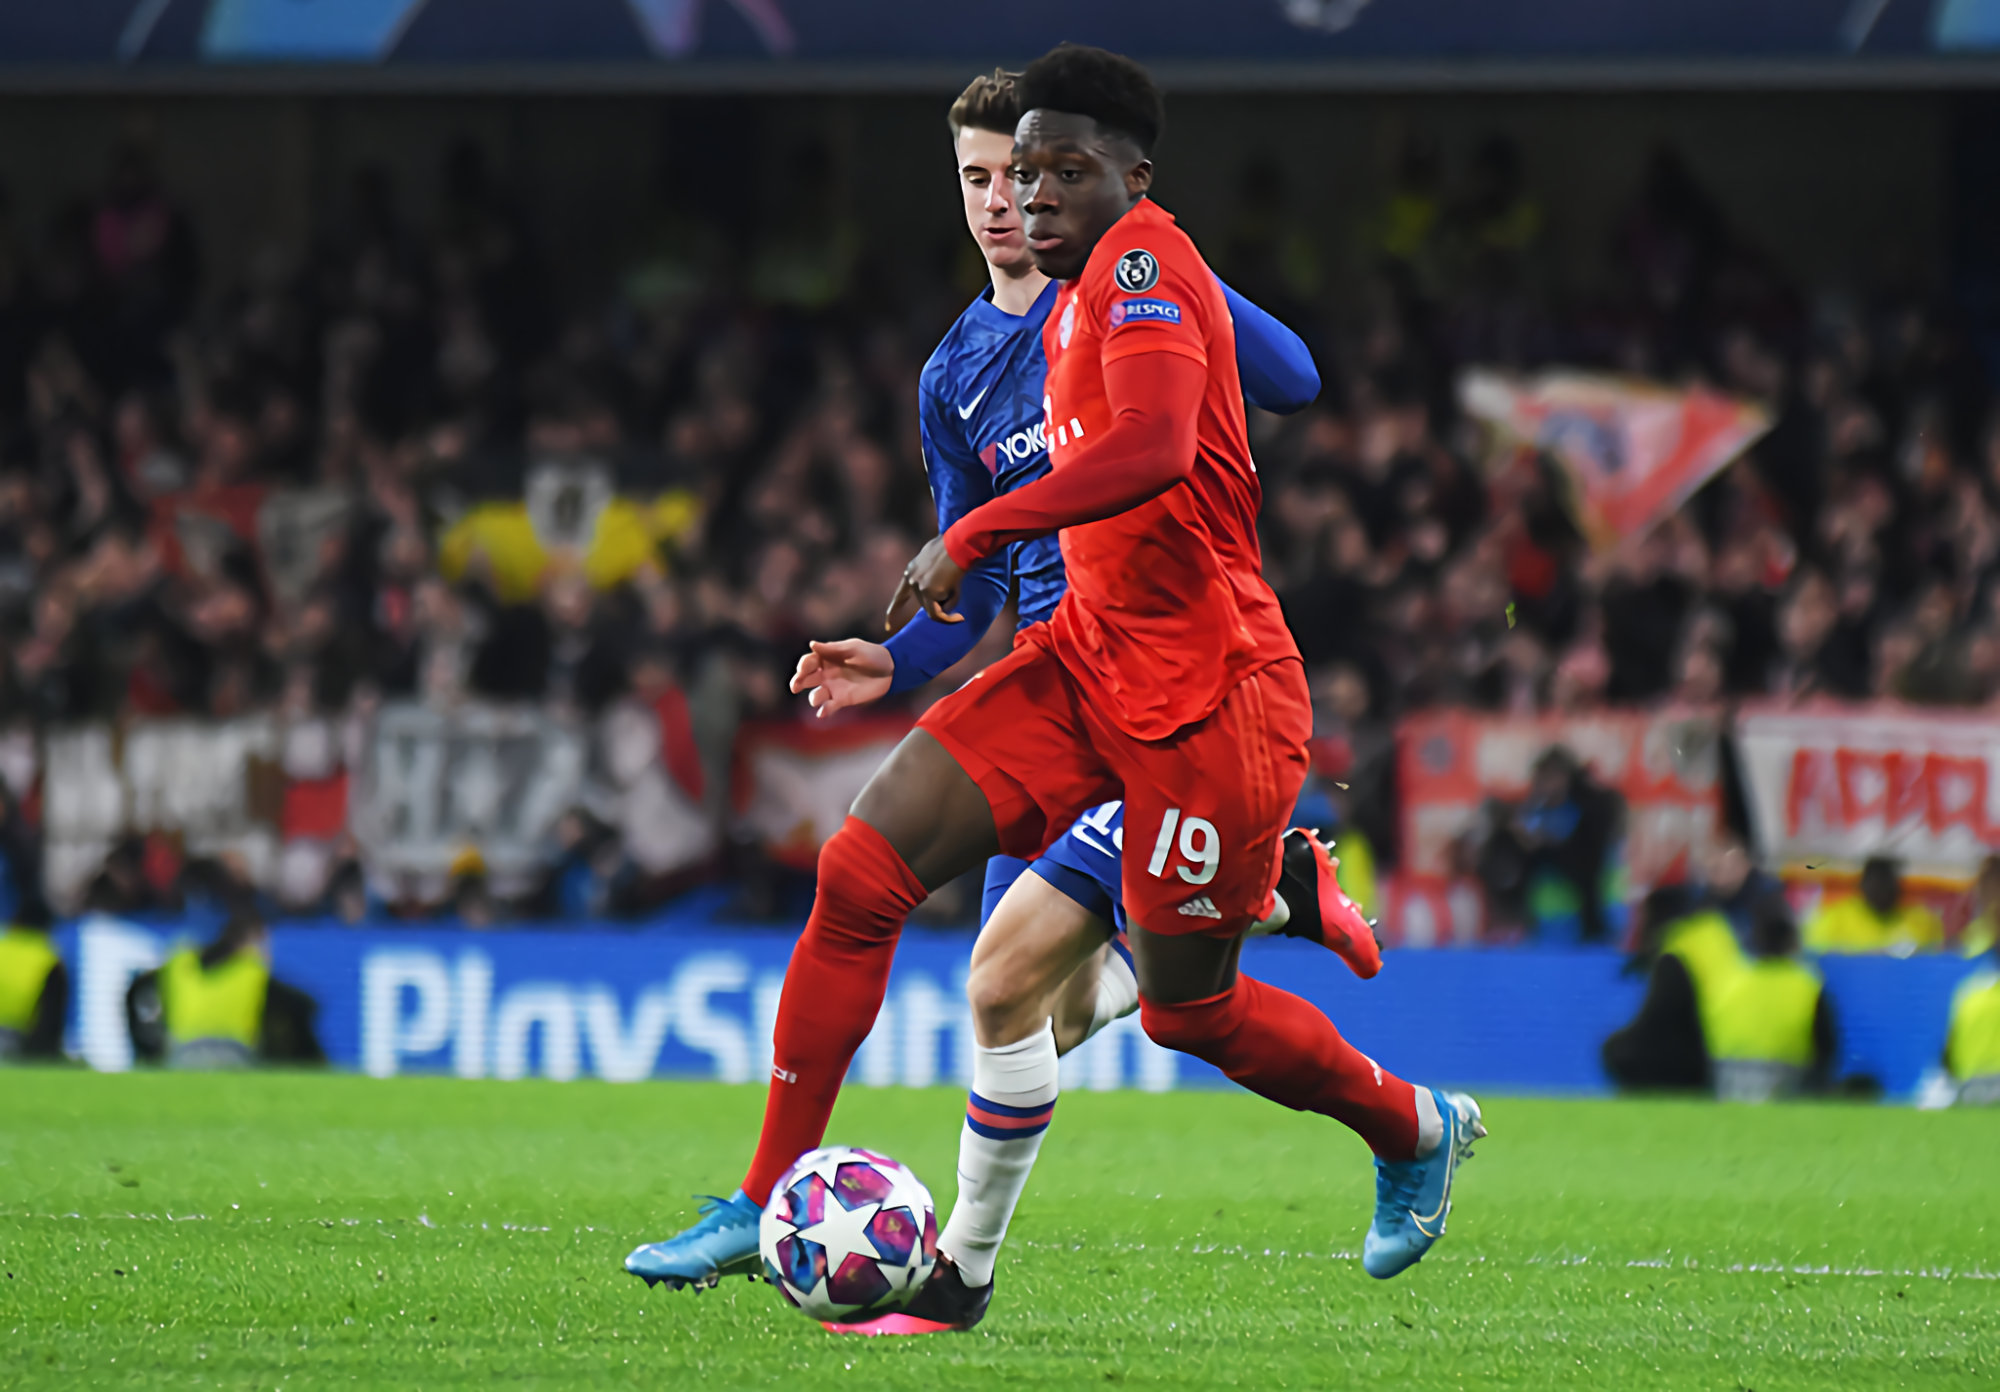 LONDON ENGLAND FEBRUARY 26 2020 Alphonso Davies of Bayern pictured during the 201920 UEFA Champions League Round of 16 game between Chelsea FC and Bayern Munich at Stamford Bridge. 2 2000x1392 1 ○ Soccer Blade